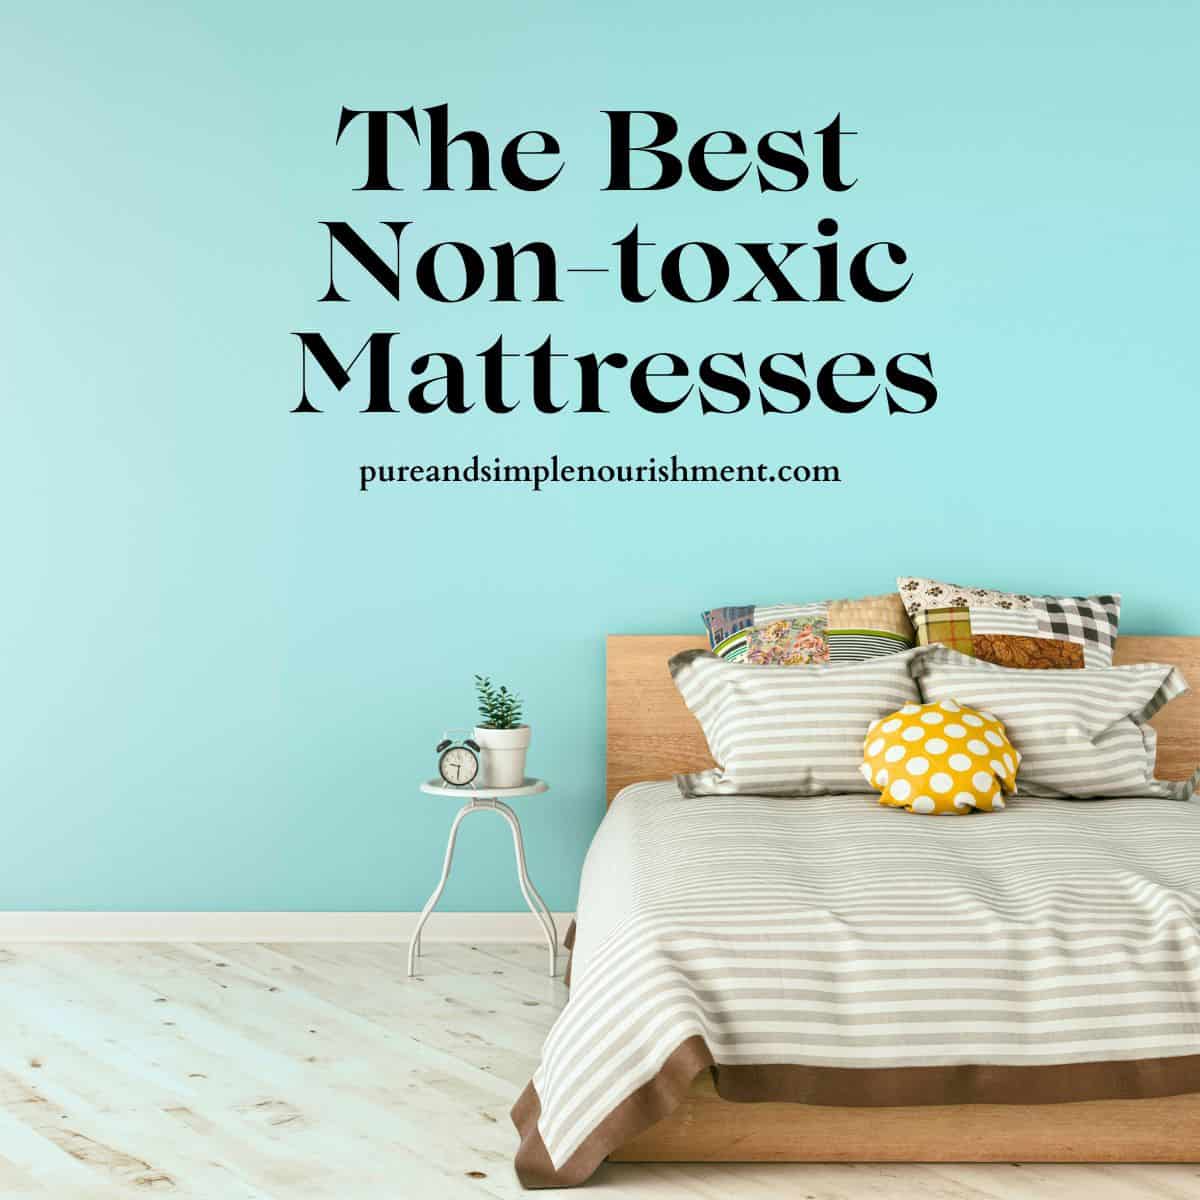 A bed with two side tables beside it with lamps on them and the title The Best Non Toxic Mattresses above it.